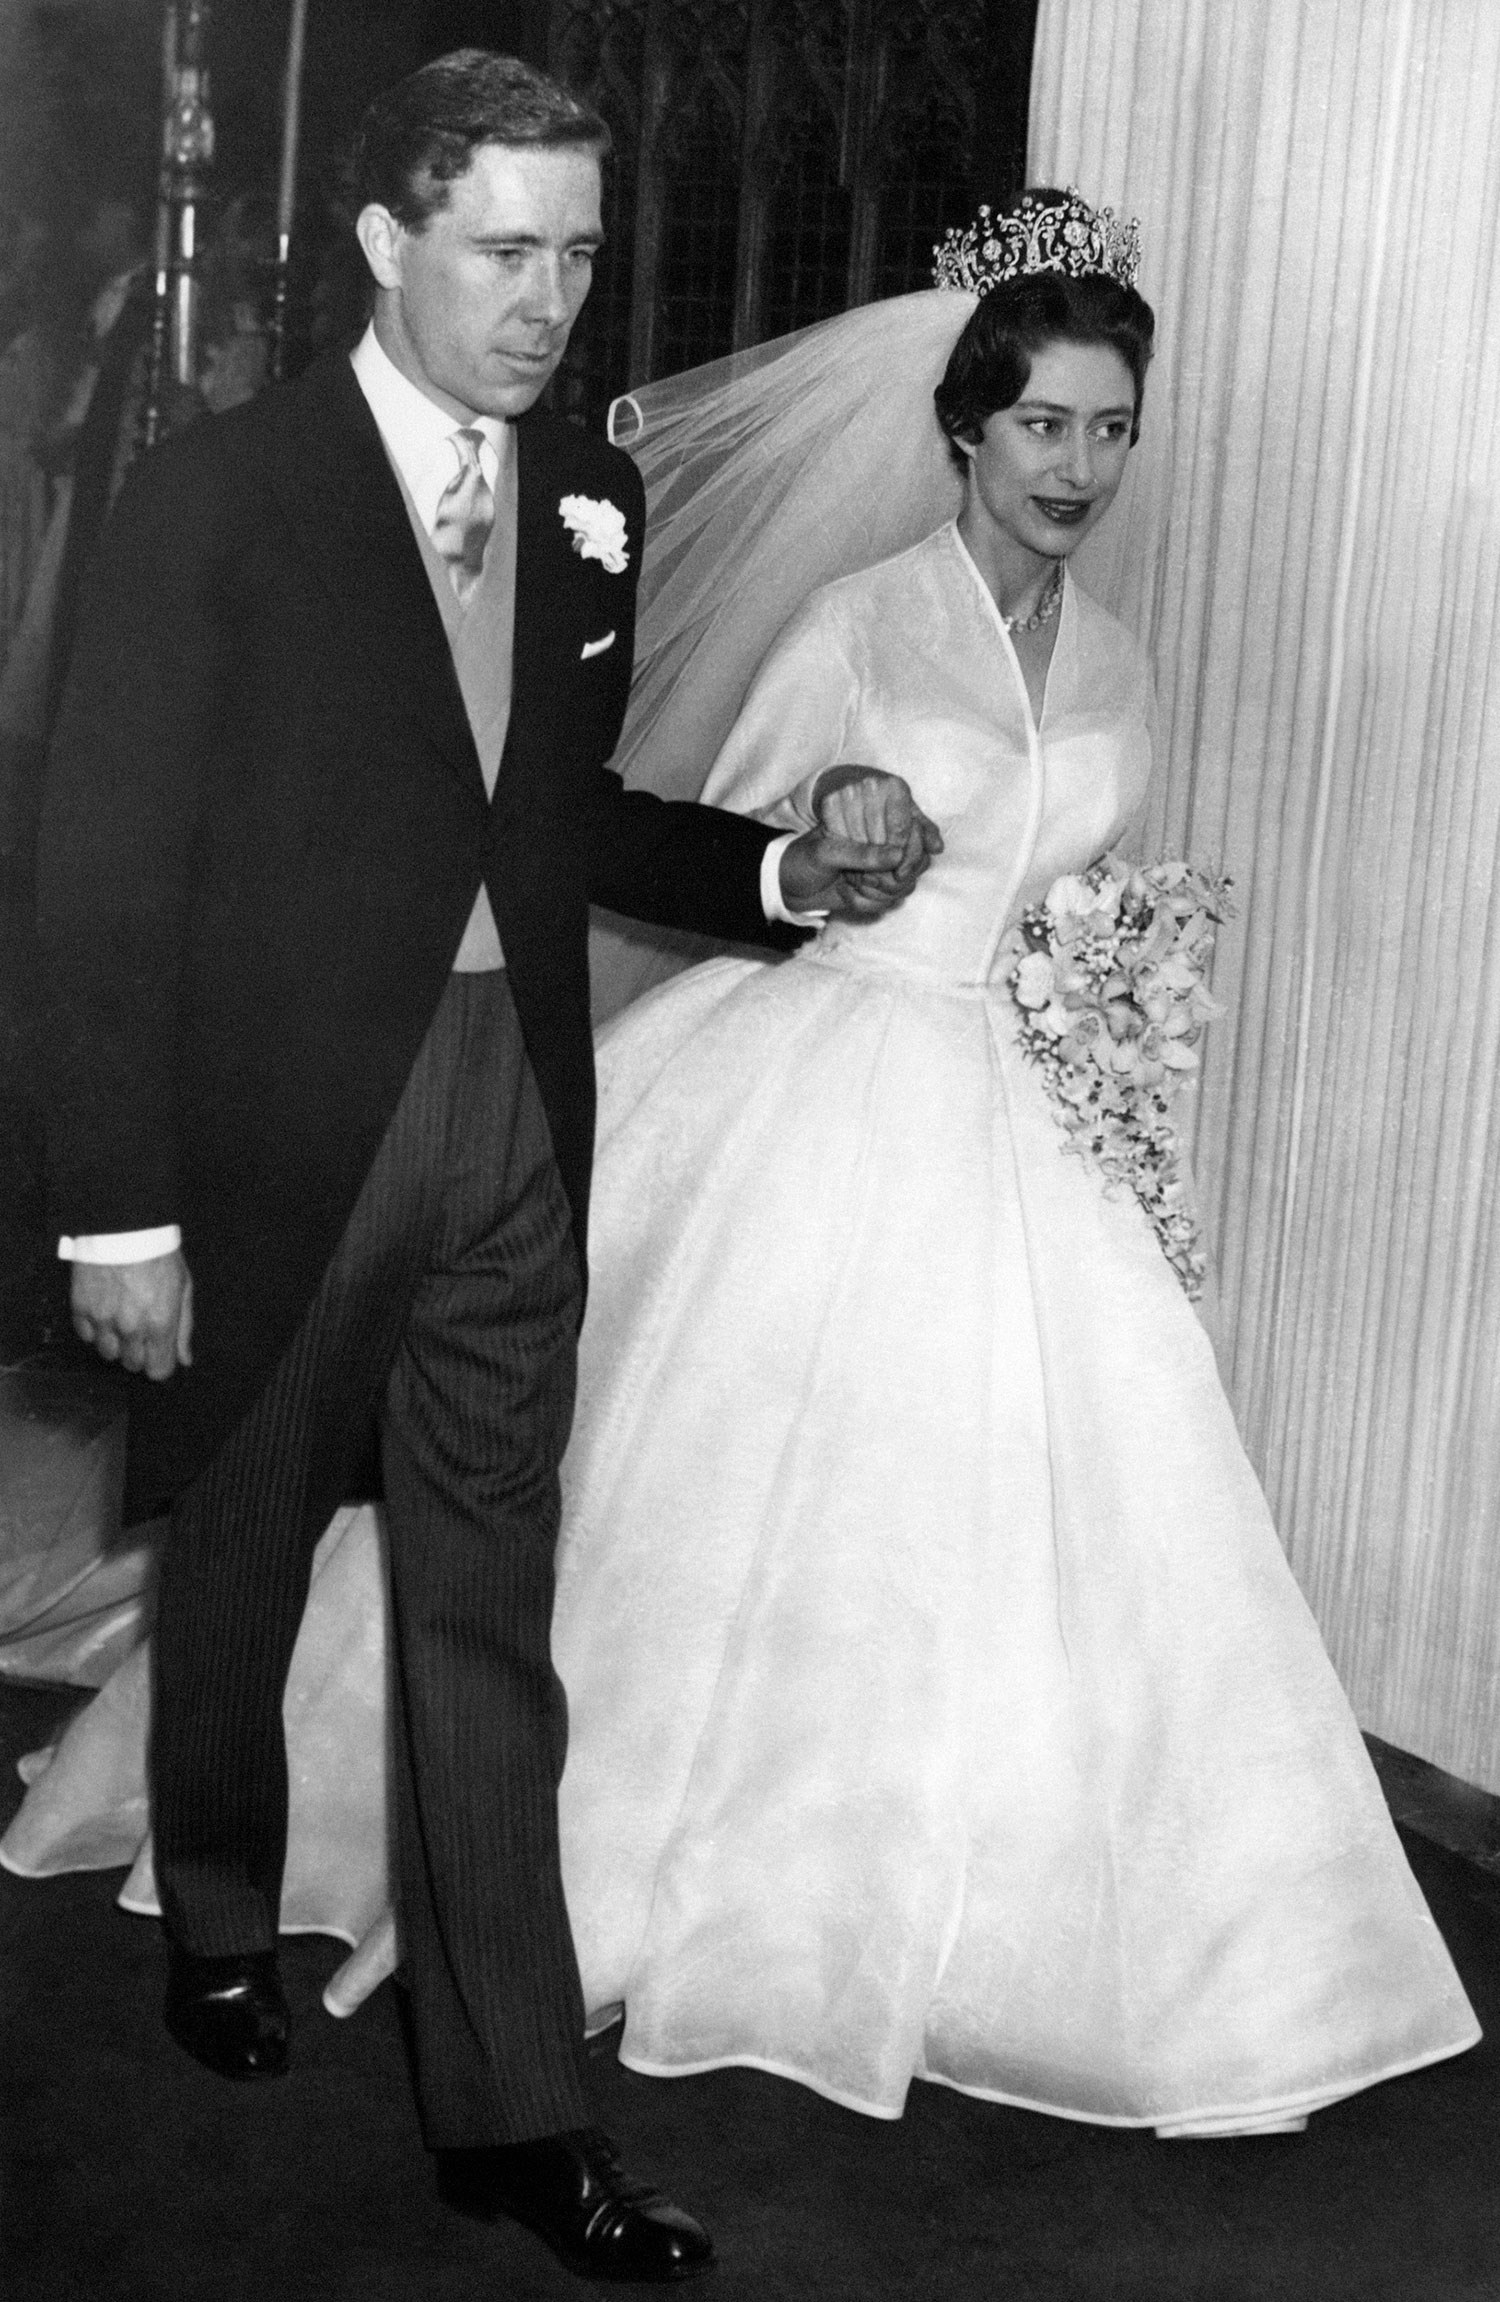 Princess Margaret with her husband, photographer Antony Armstrong-Jones at London's Westminster Abbey on their wedding day, May 6, 1960